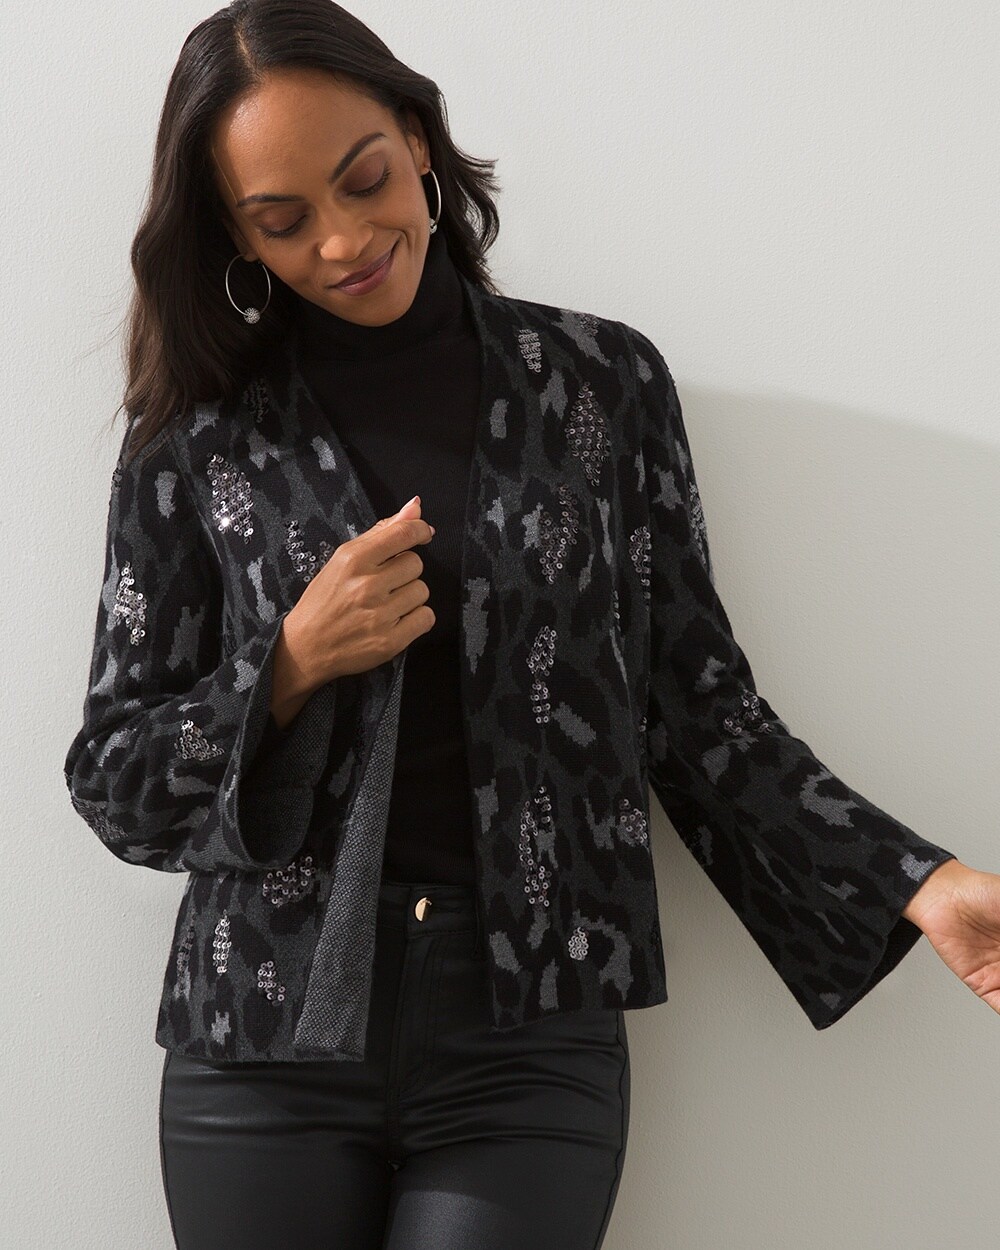 Jacquard Sequin Cardigan video preview image, click to start video